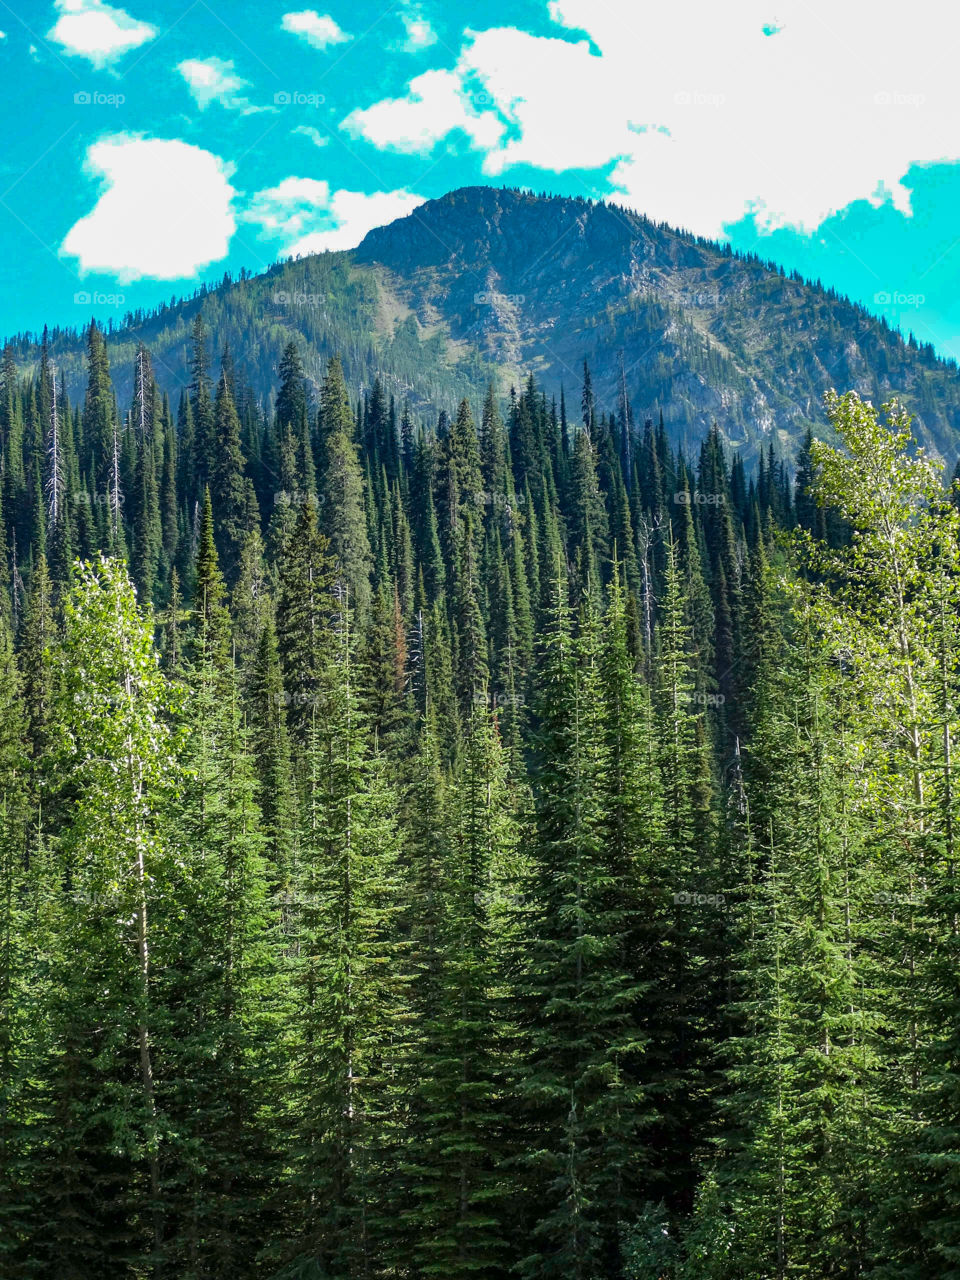 A pine forest draping the base of a mountain peak in Glacier National Park.